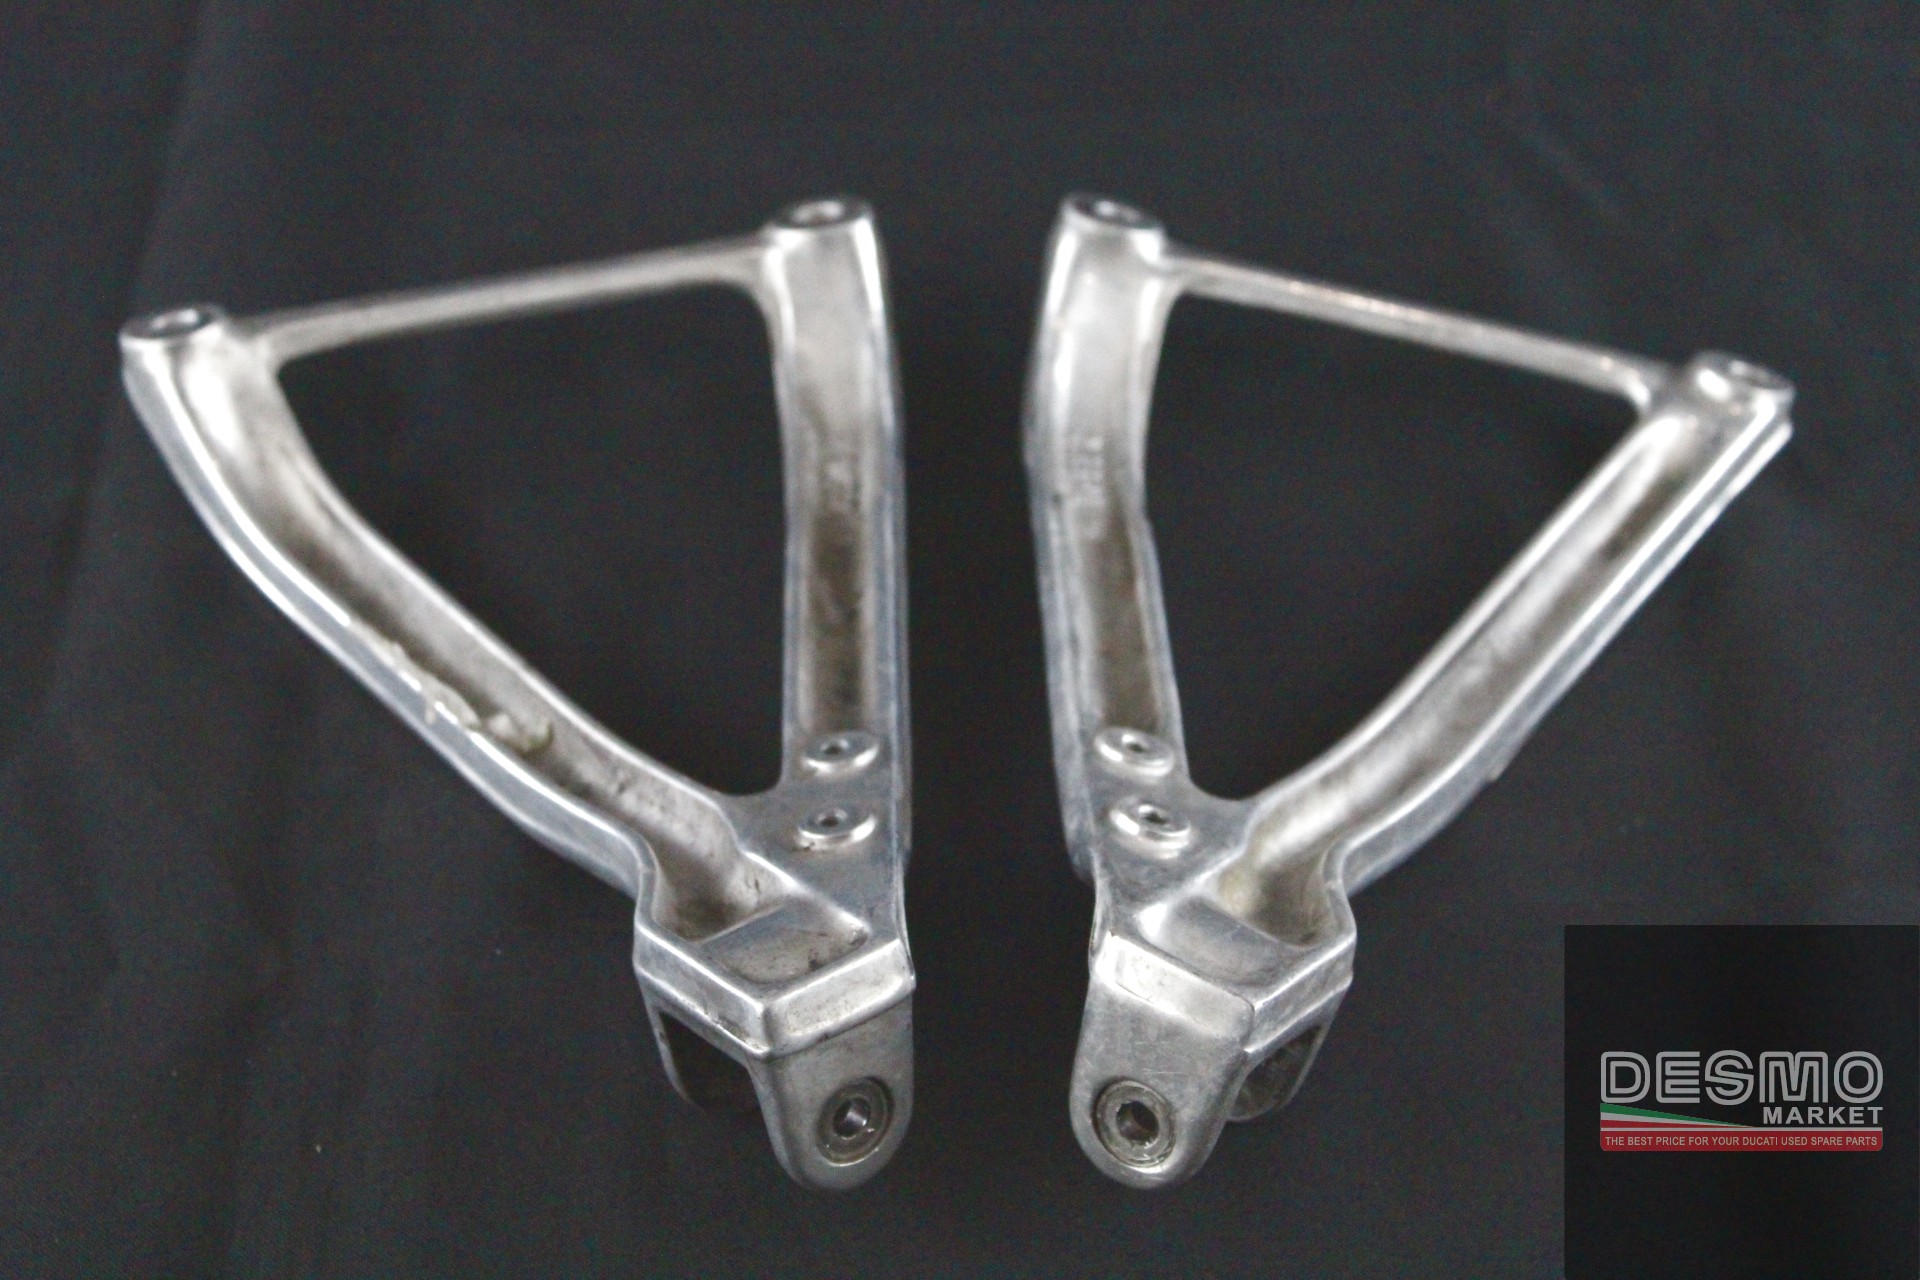 Details about   DUCATI DUCATI 97-98 ST2 & 99 ST4 RIGHT Passenger Peg Assembly NICE